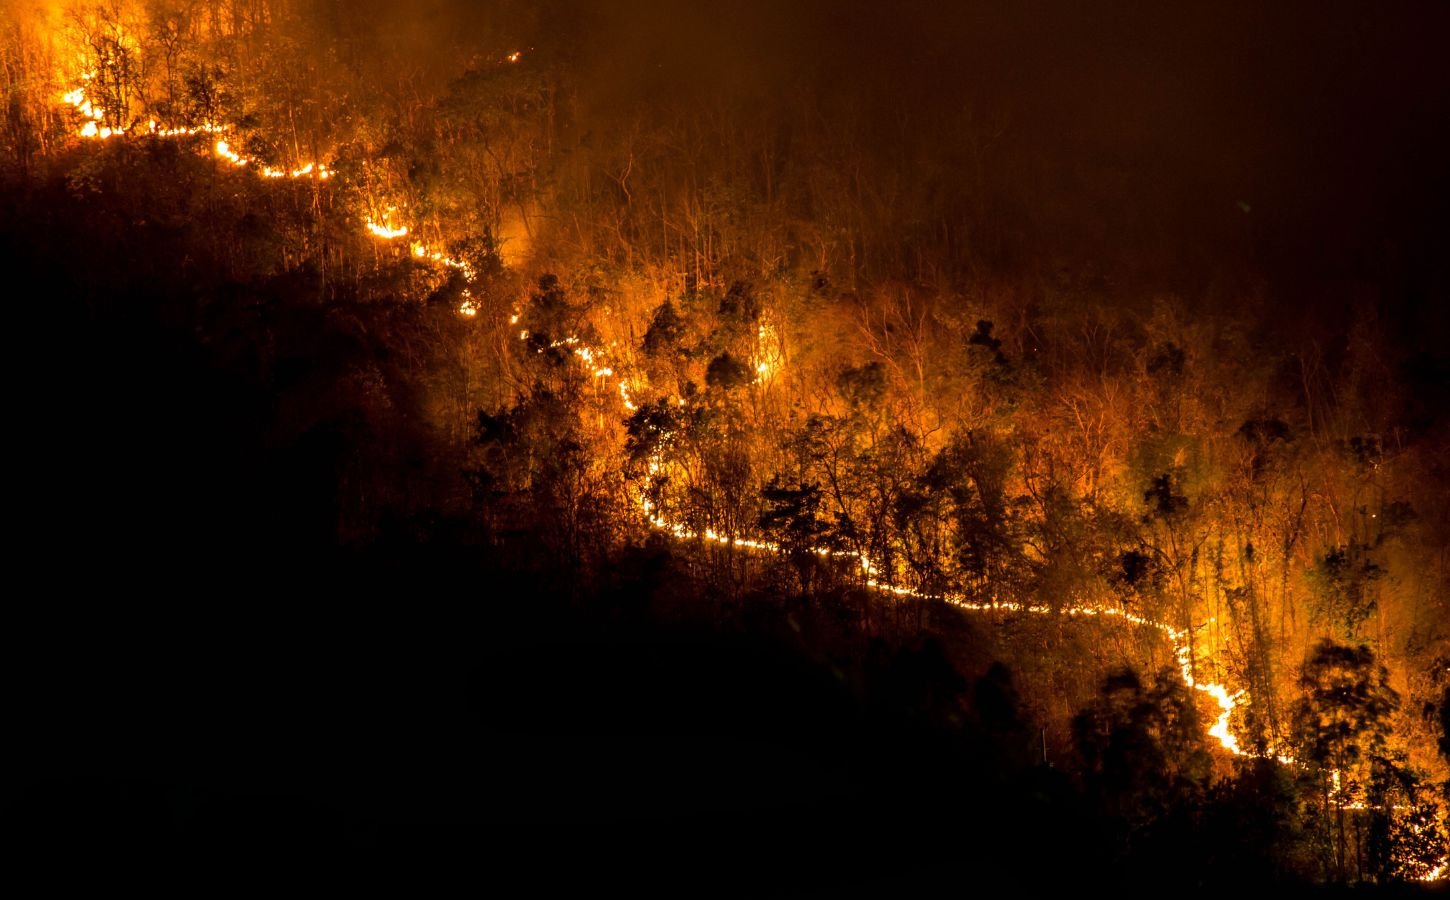 Photo shows a large forest fire from above, with the trees to either side of the flames in relative darkness